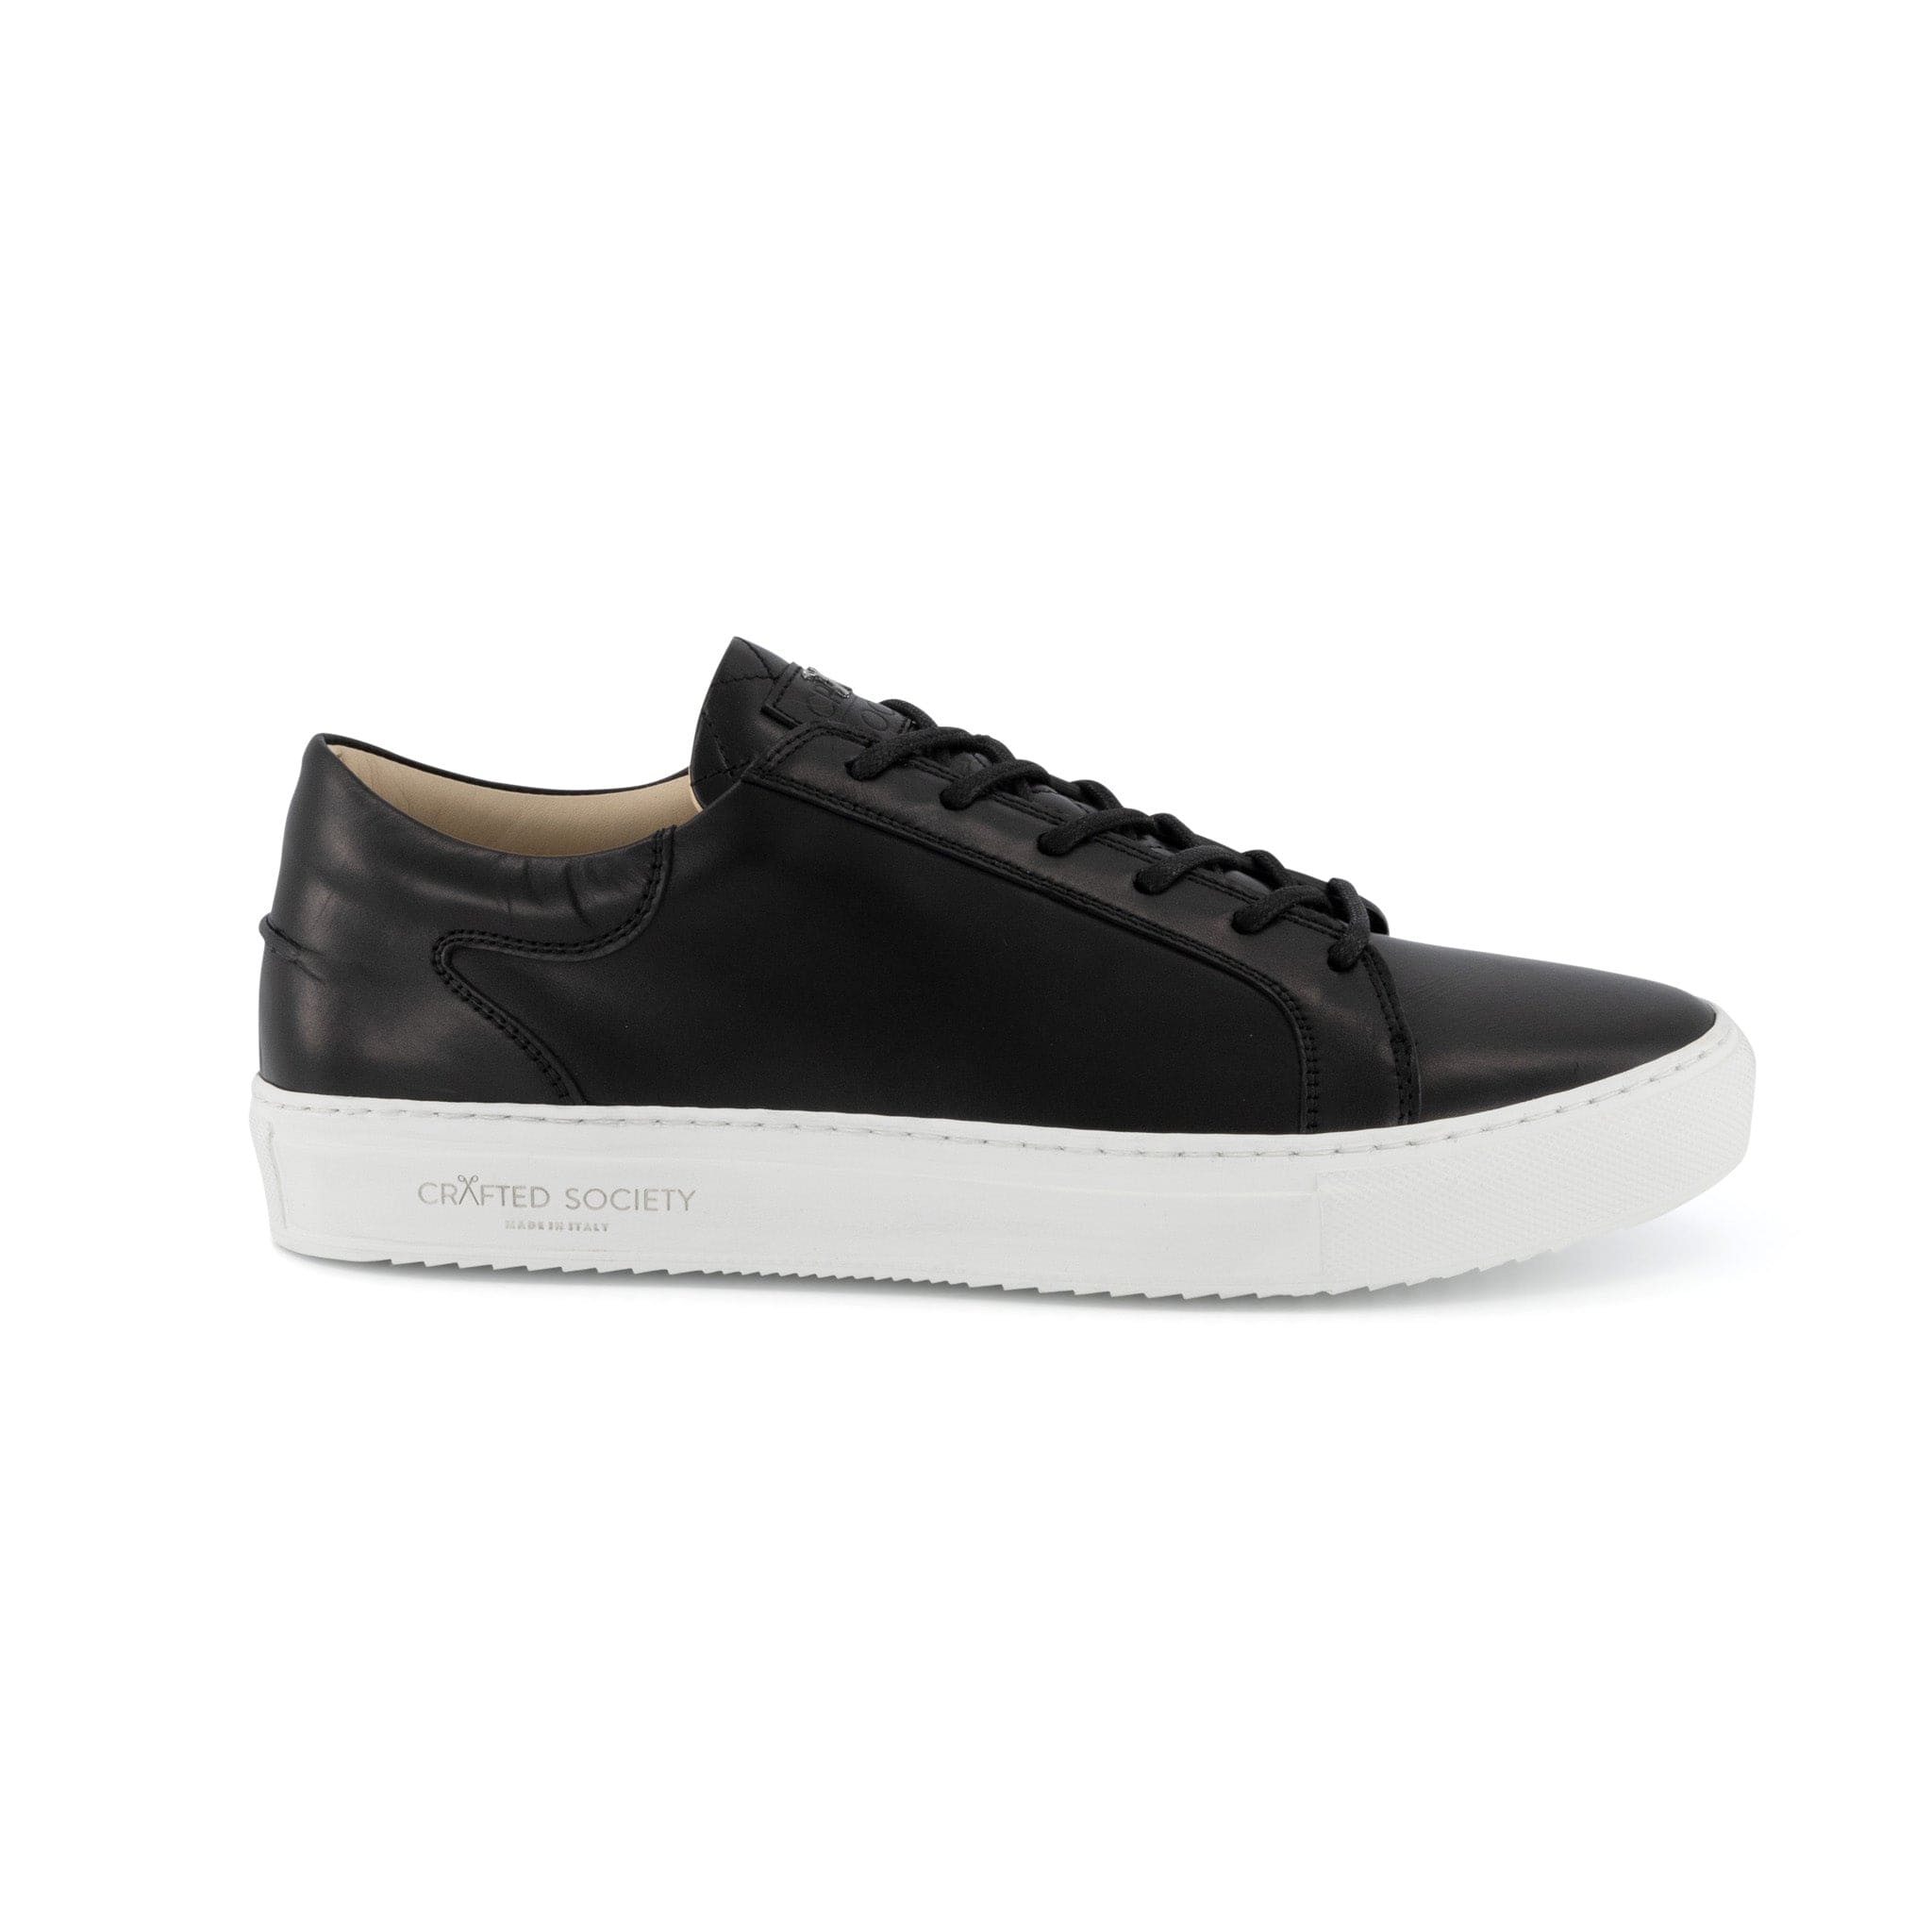 Mario Low Refined Sneaker | Black Full Grain Leather | White Outsole | Made in Italy | Sizes 40 & 41